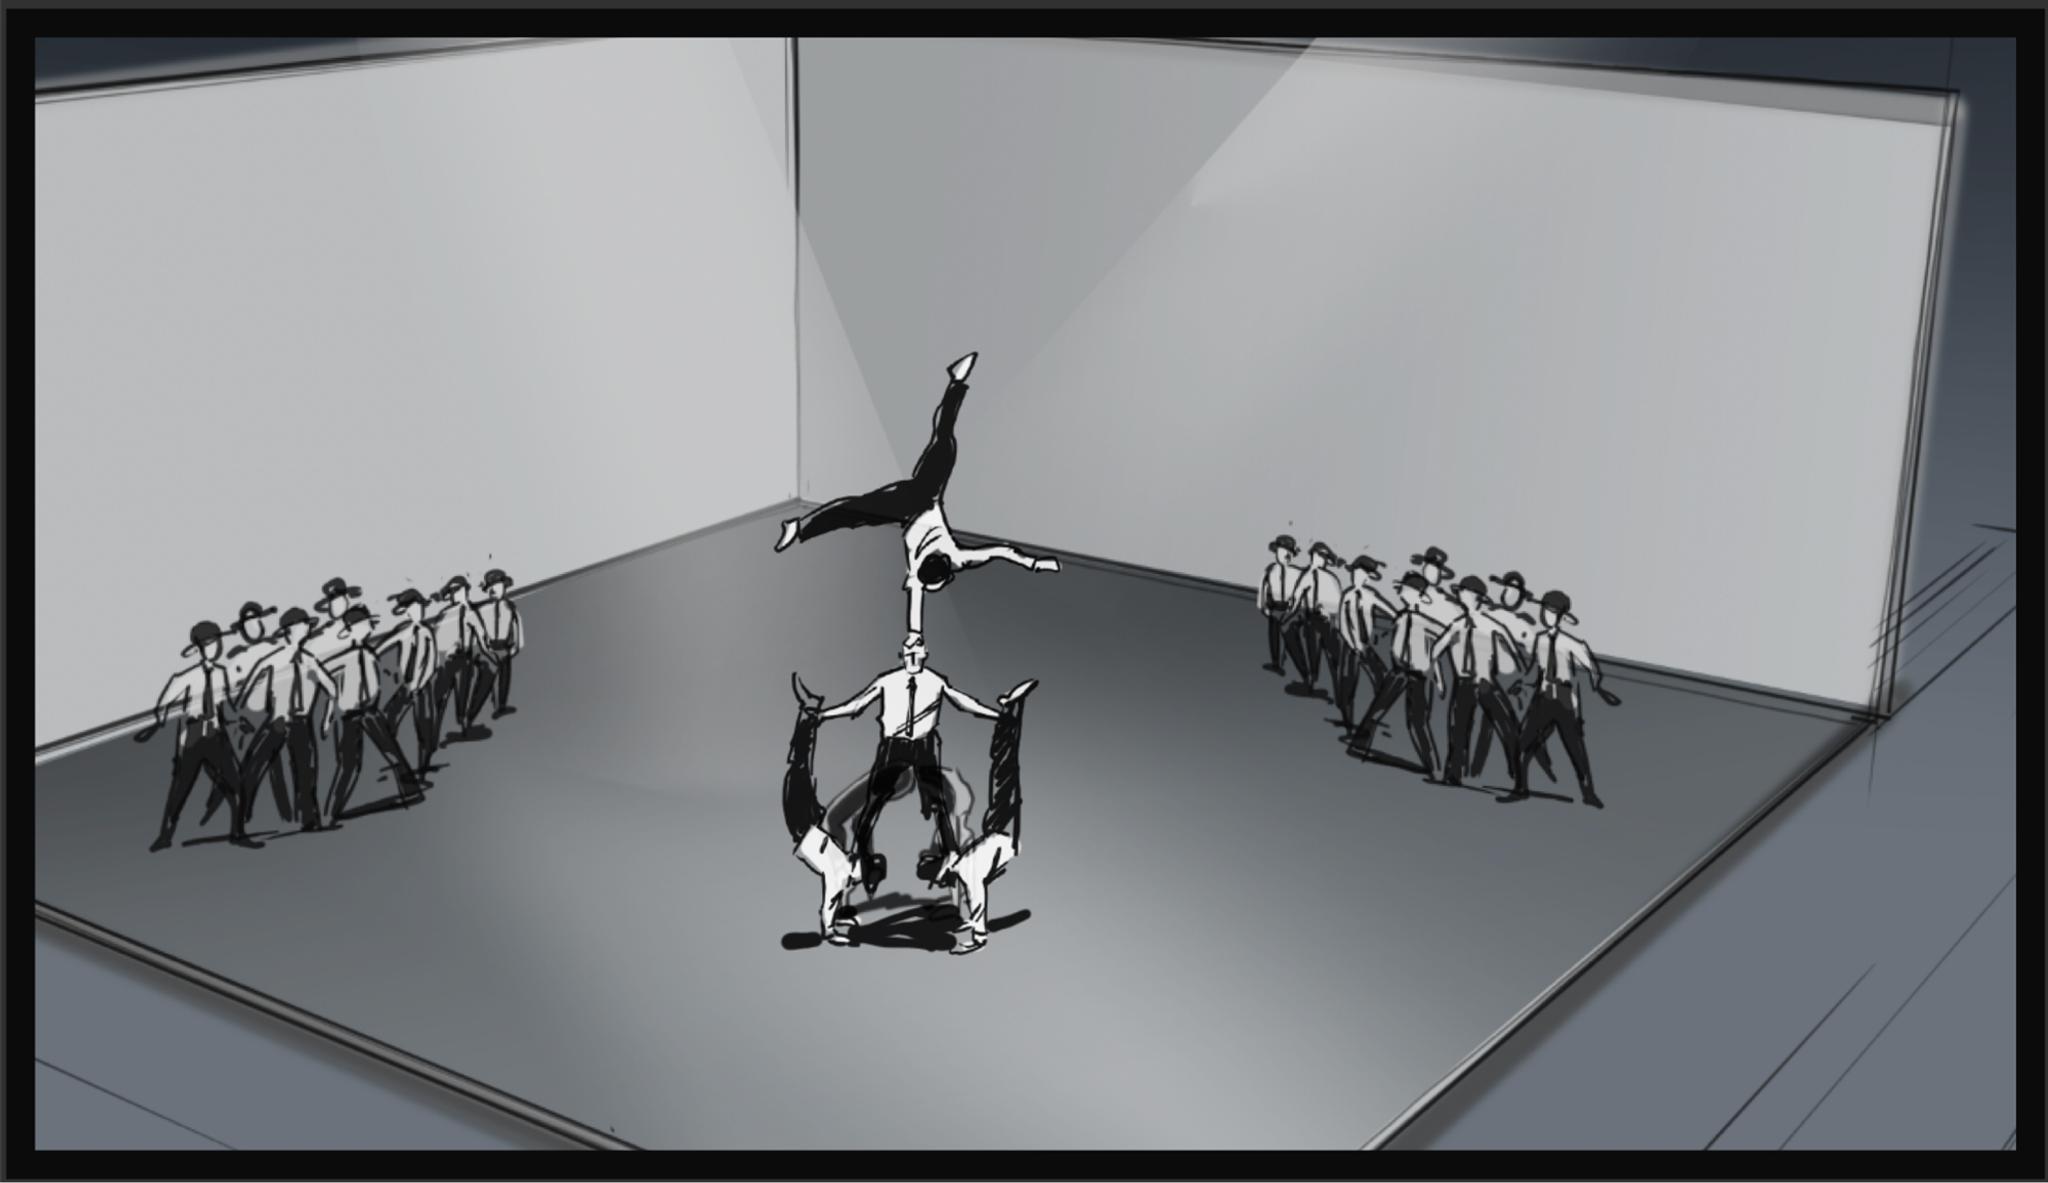 A sketch of the American Express stage. 2 groups of dancers face towards a group where an acrobat is doing a one handed handstand on someone's head, who is standing on two other people who are also doing handstands.